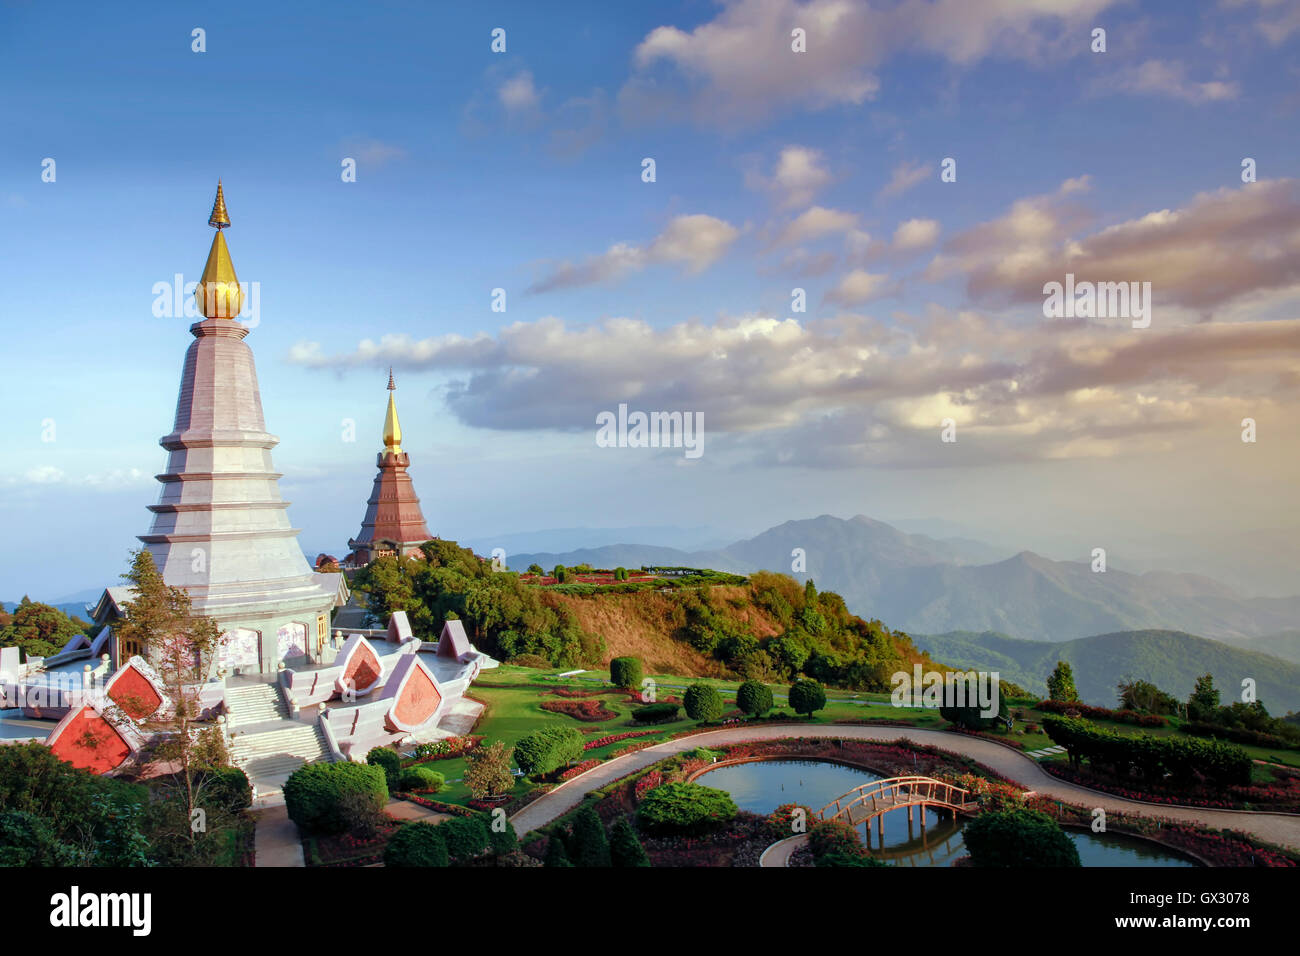 A view of Buddhist temples at Doi Inthanon National Park, near Chiang Mai in Northern Thailand Stock Photo